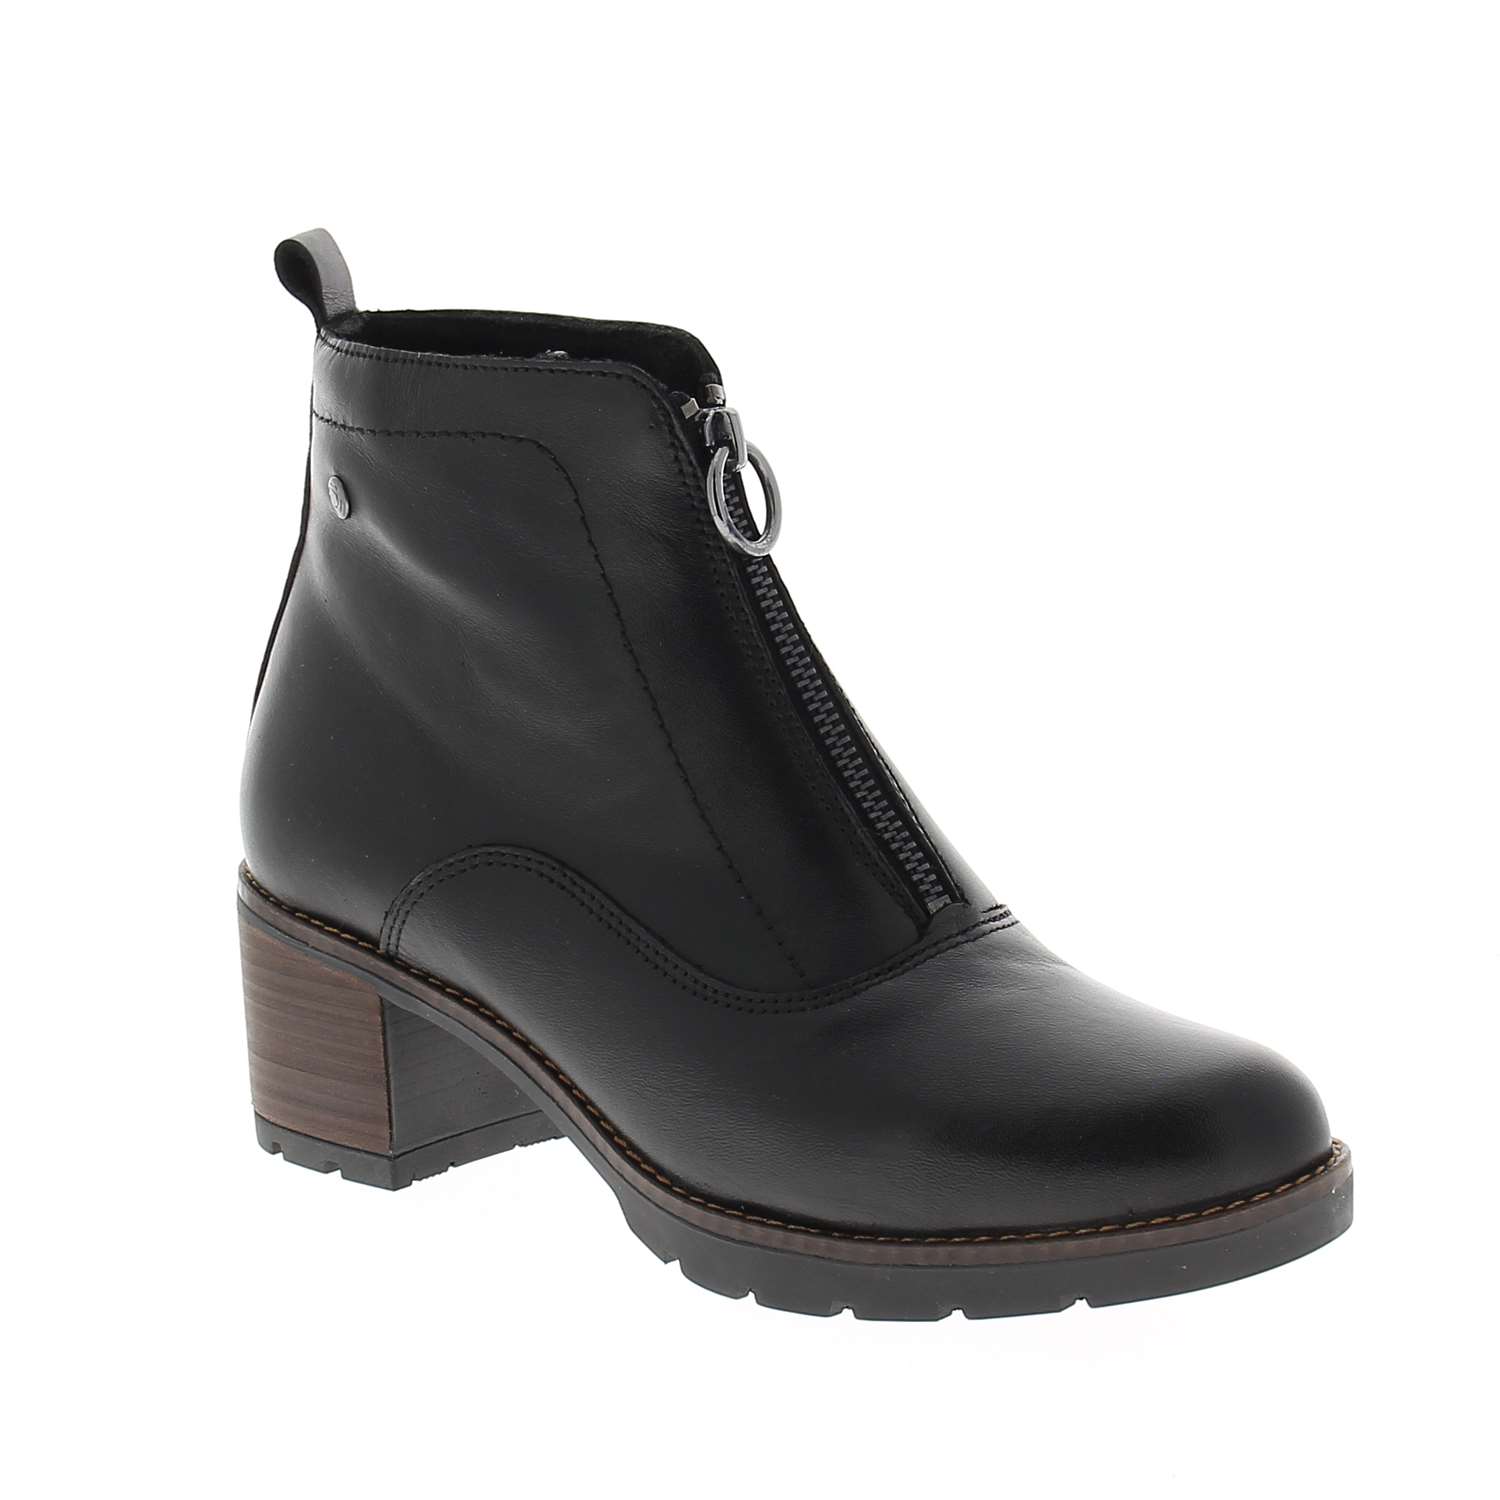 01 - KOALY -  - Boots et bottines - Cuir